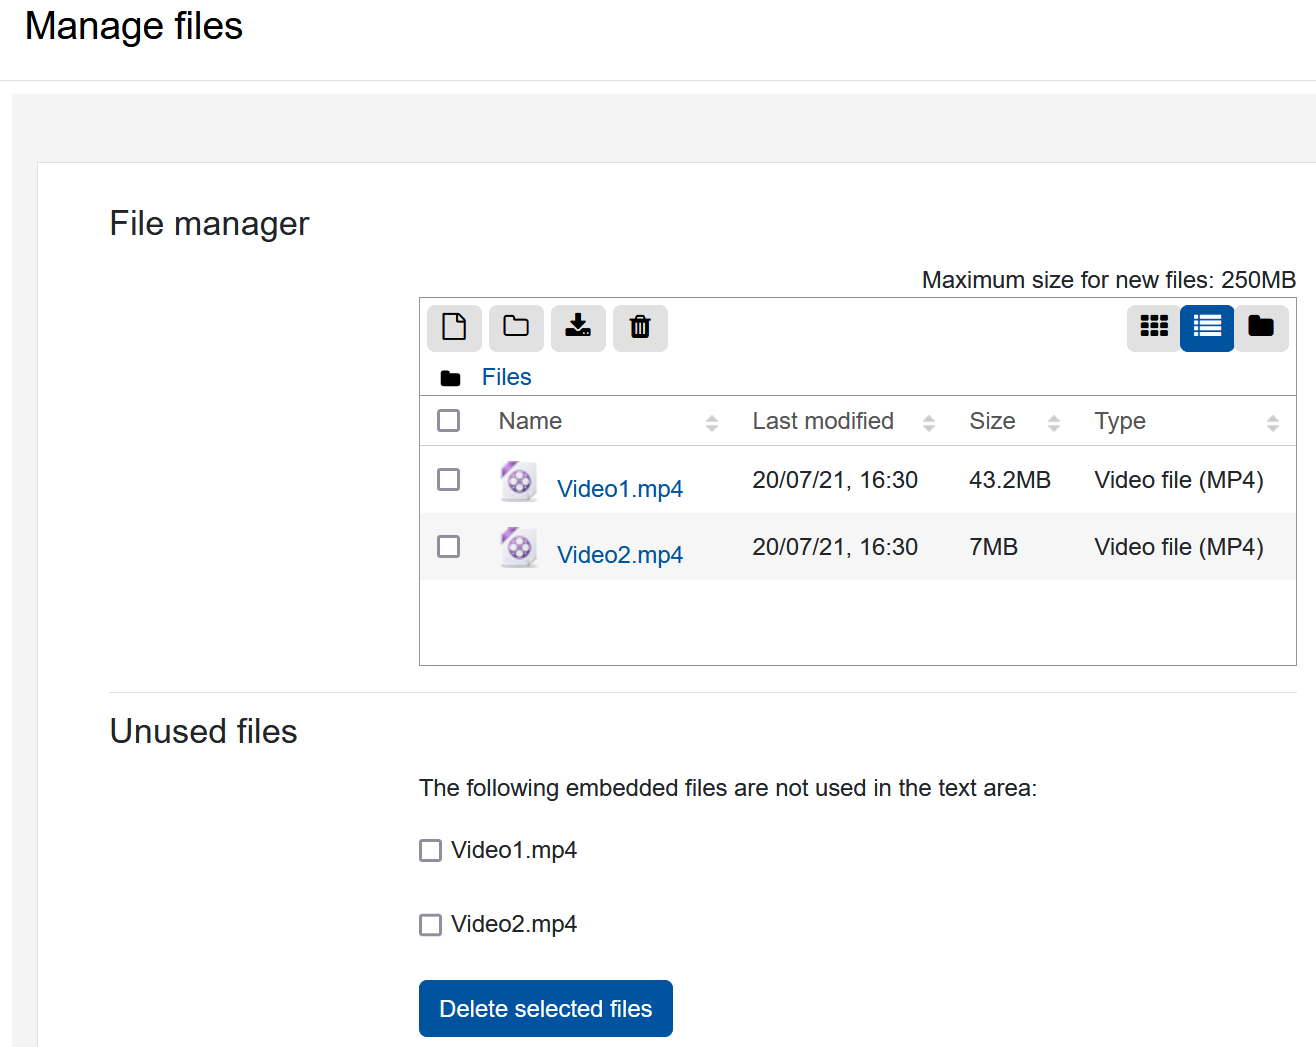 The screenshot shows the "Manage files" dialogue. In the "File manager" area it shows a list of two files, each with a checkbox, its name, the date when it was last modified, the size and the type, "Video file (MP4)" for both. A line of icons allows to create a file, create a folder, download or delete a file. Three more icons allow switching how the files are displayed, as icons, in a list, or in a folder structure. Below this list there ist a second list, "Unused files". A text reads "The following embedded files are not used in the text area:", with two file names together with a checkbox below. At the bottom, there is a button called "Delete selected files".